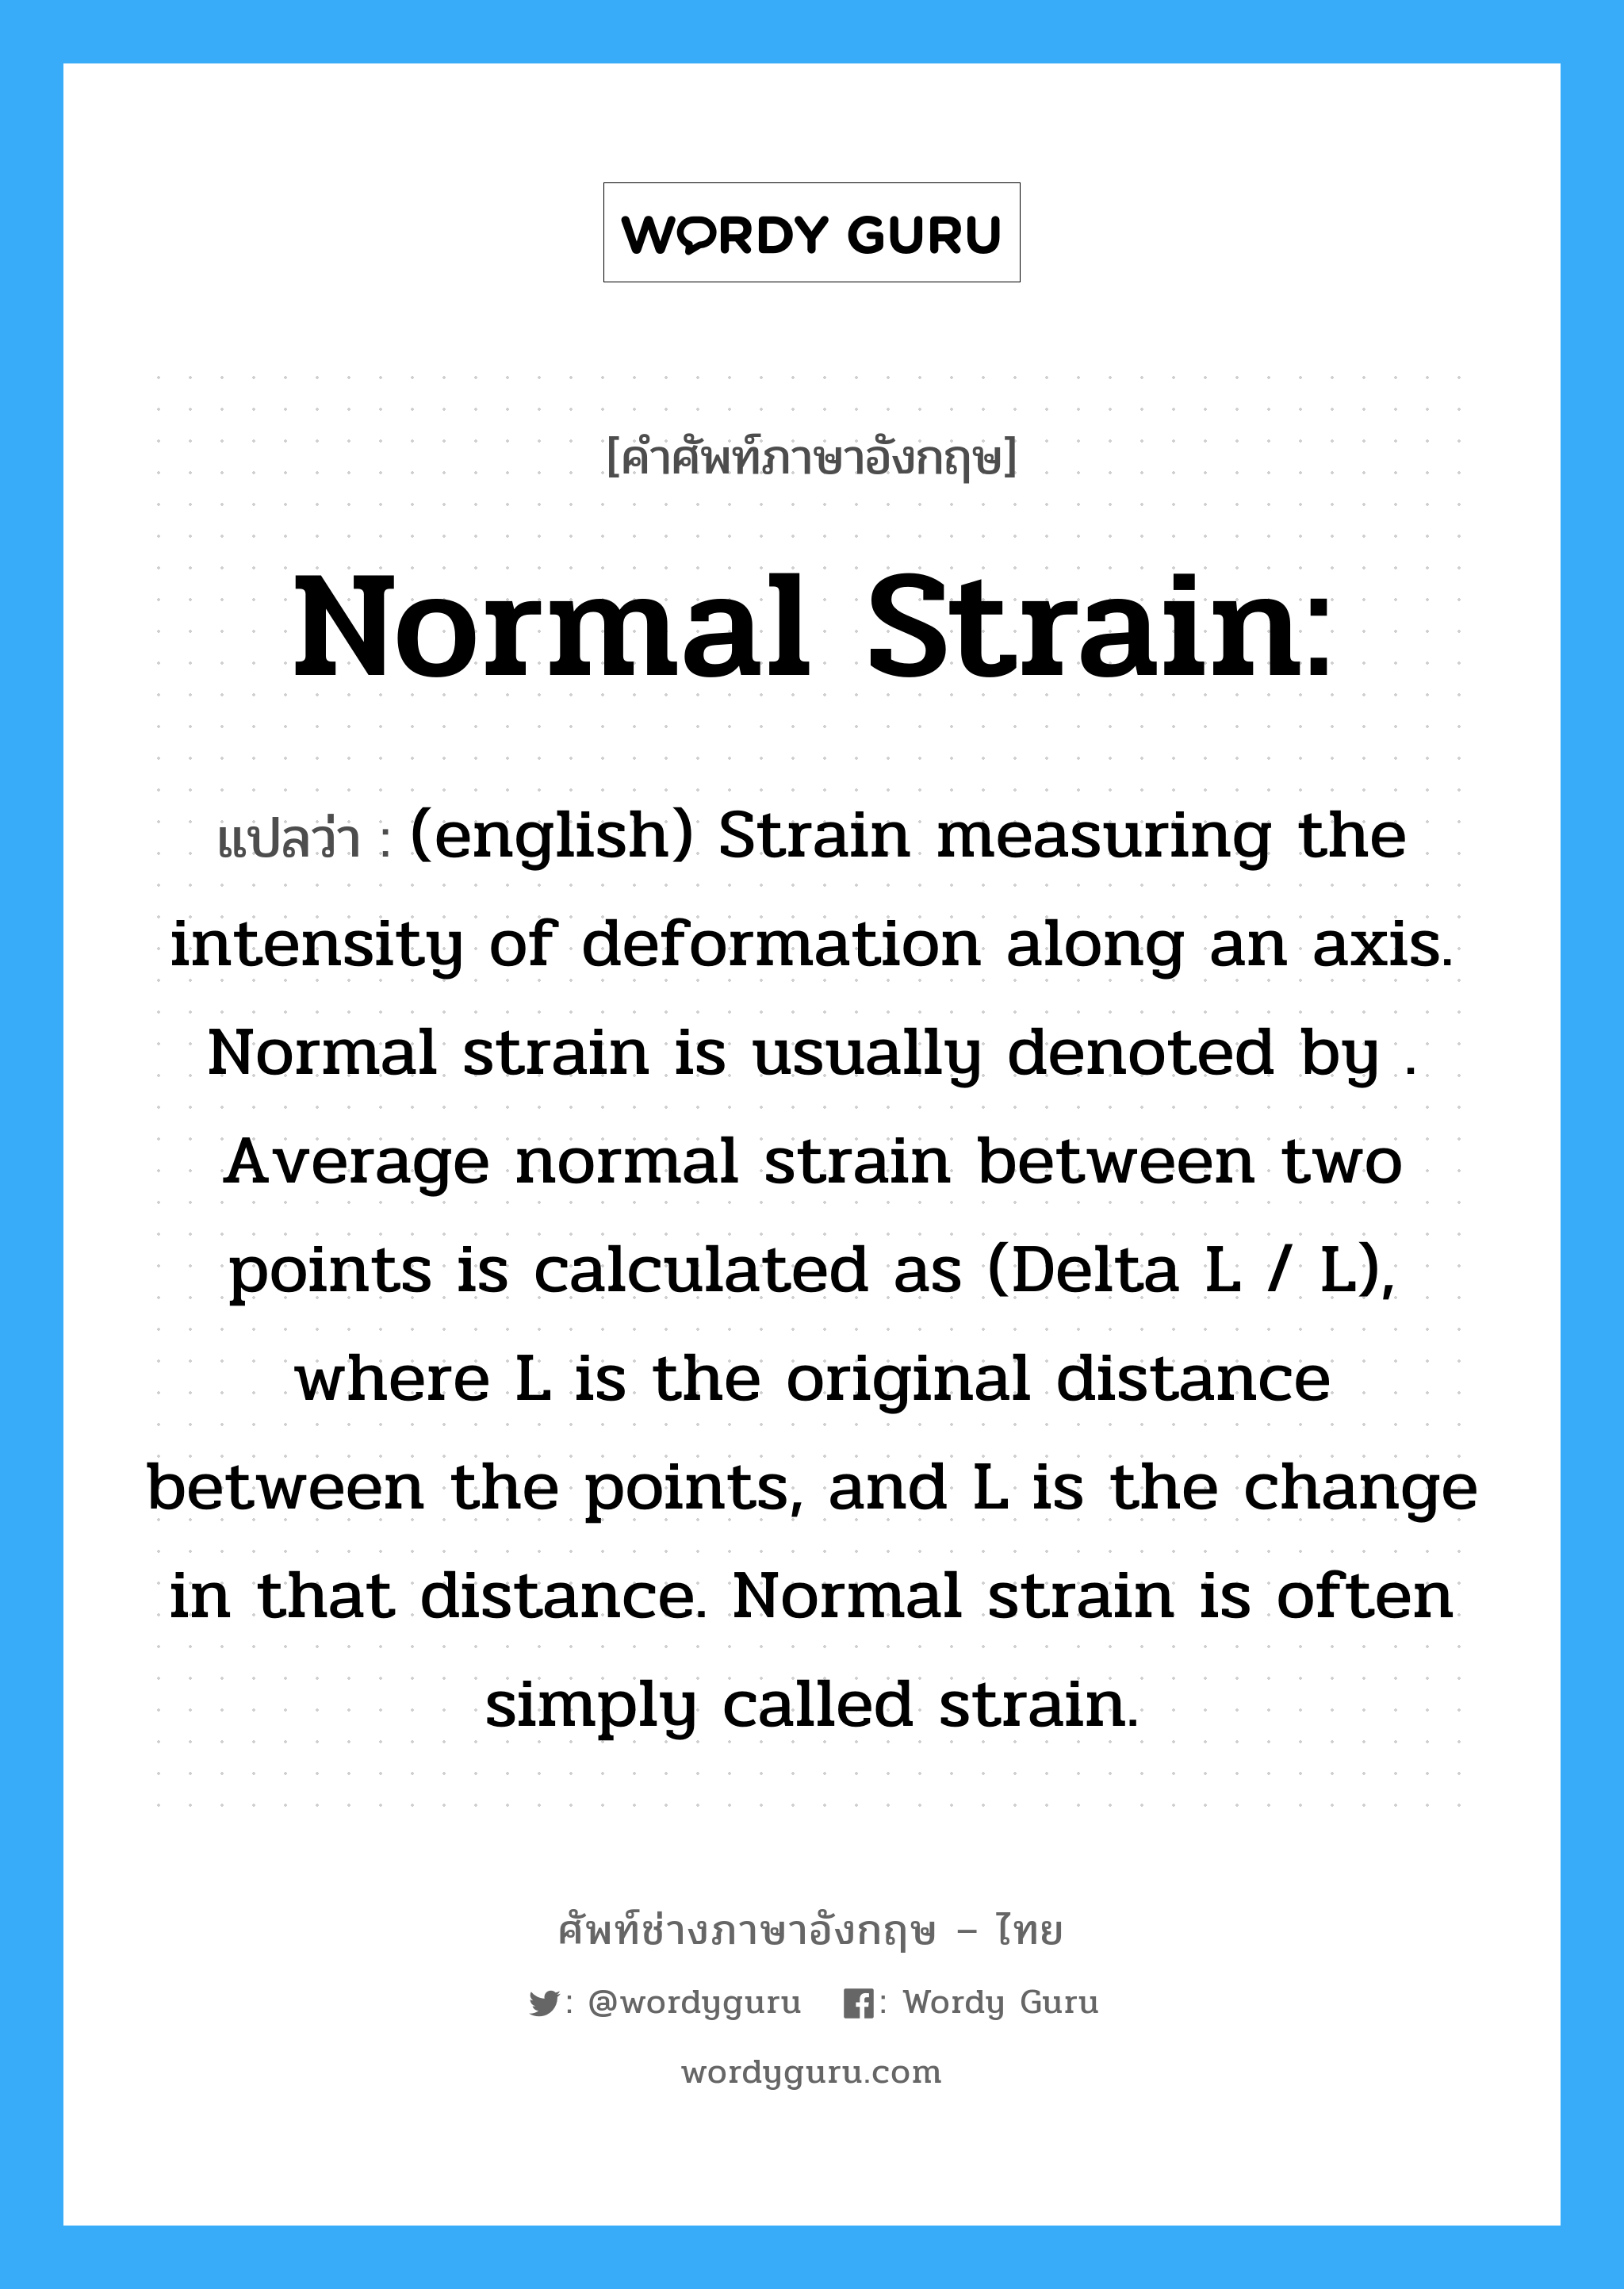 Normal strain: แปลว่า?, คำศัพท์ช่างภาษาอังกฤษ - ไทย Normal strain: คำศัพท์ภาษาอังกฤษ Normal strain: แปลว่า (english) Strain measuring the intensity of deformation along an axis. Normal strain is usually denoted by . Average normal strain between two points is calculated as (Delta L / L), where L is the original distance between the points, and L is the change in that distance. Normal strain is often simply called strain.